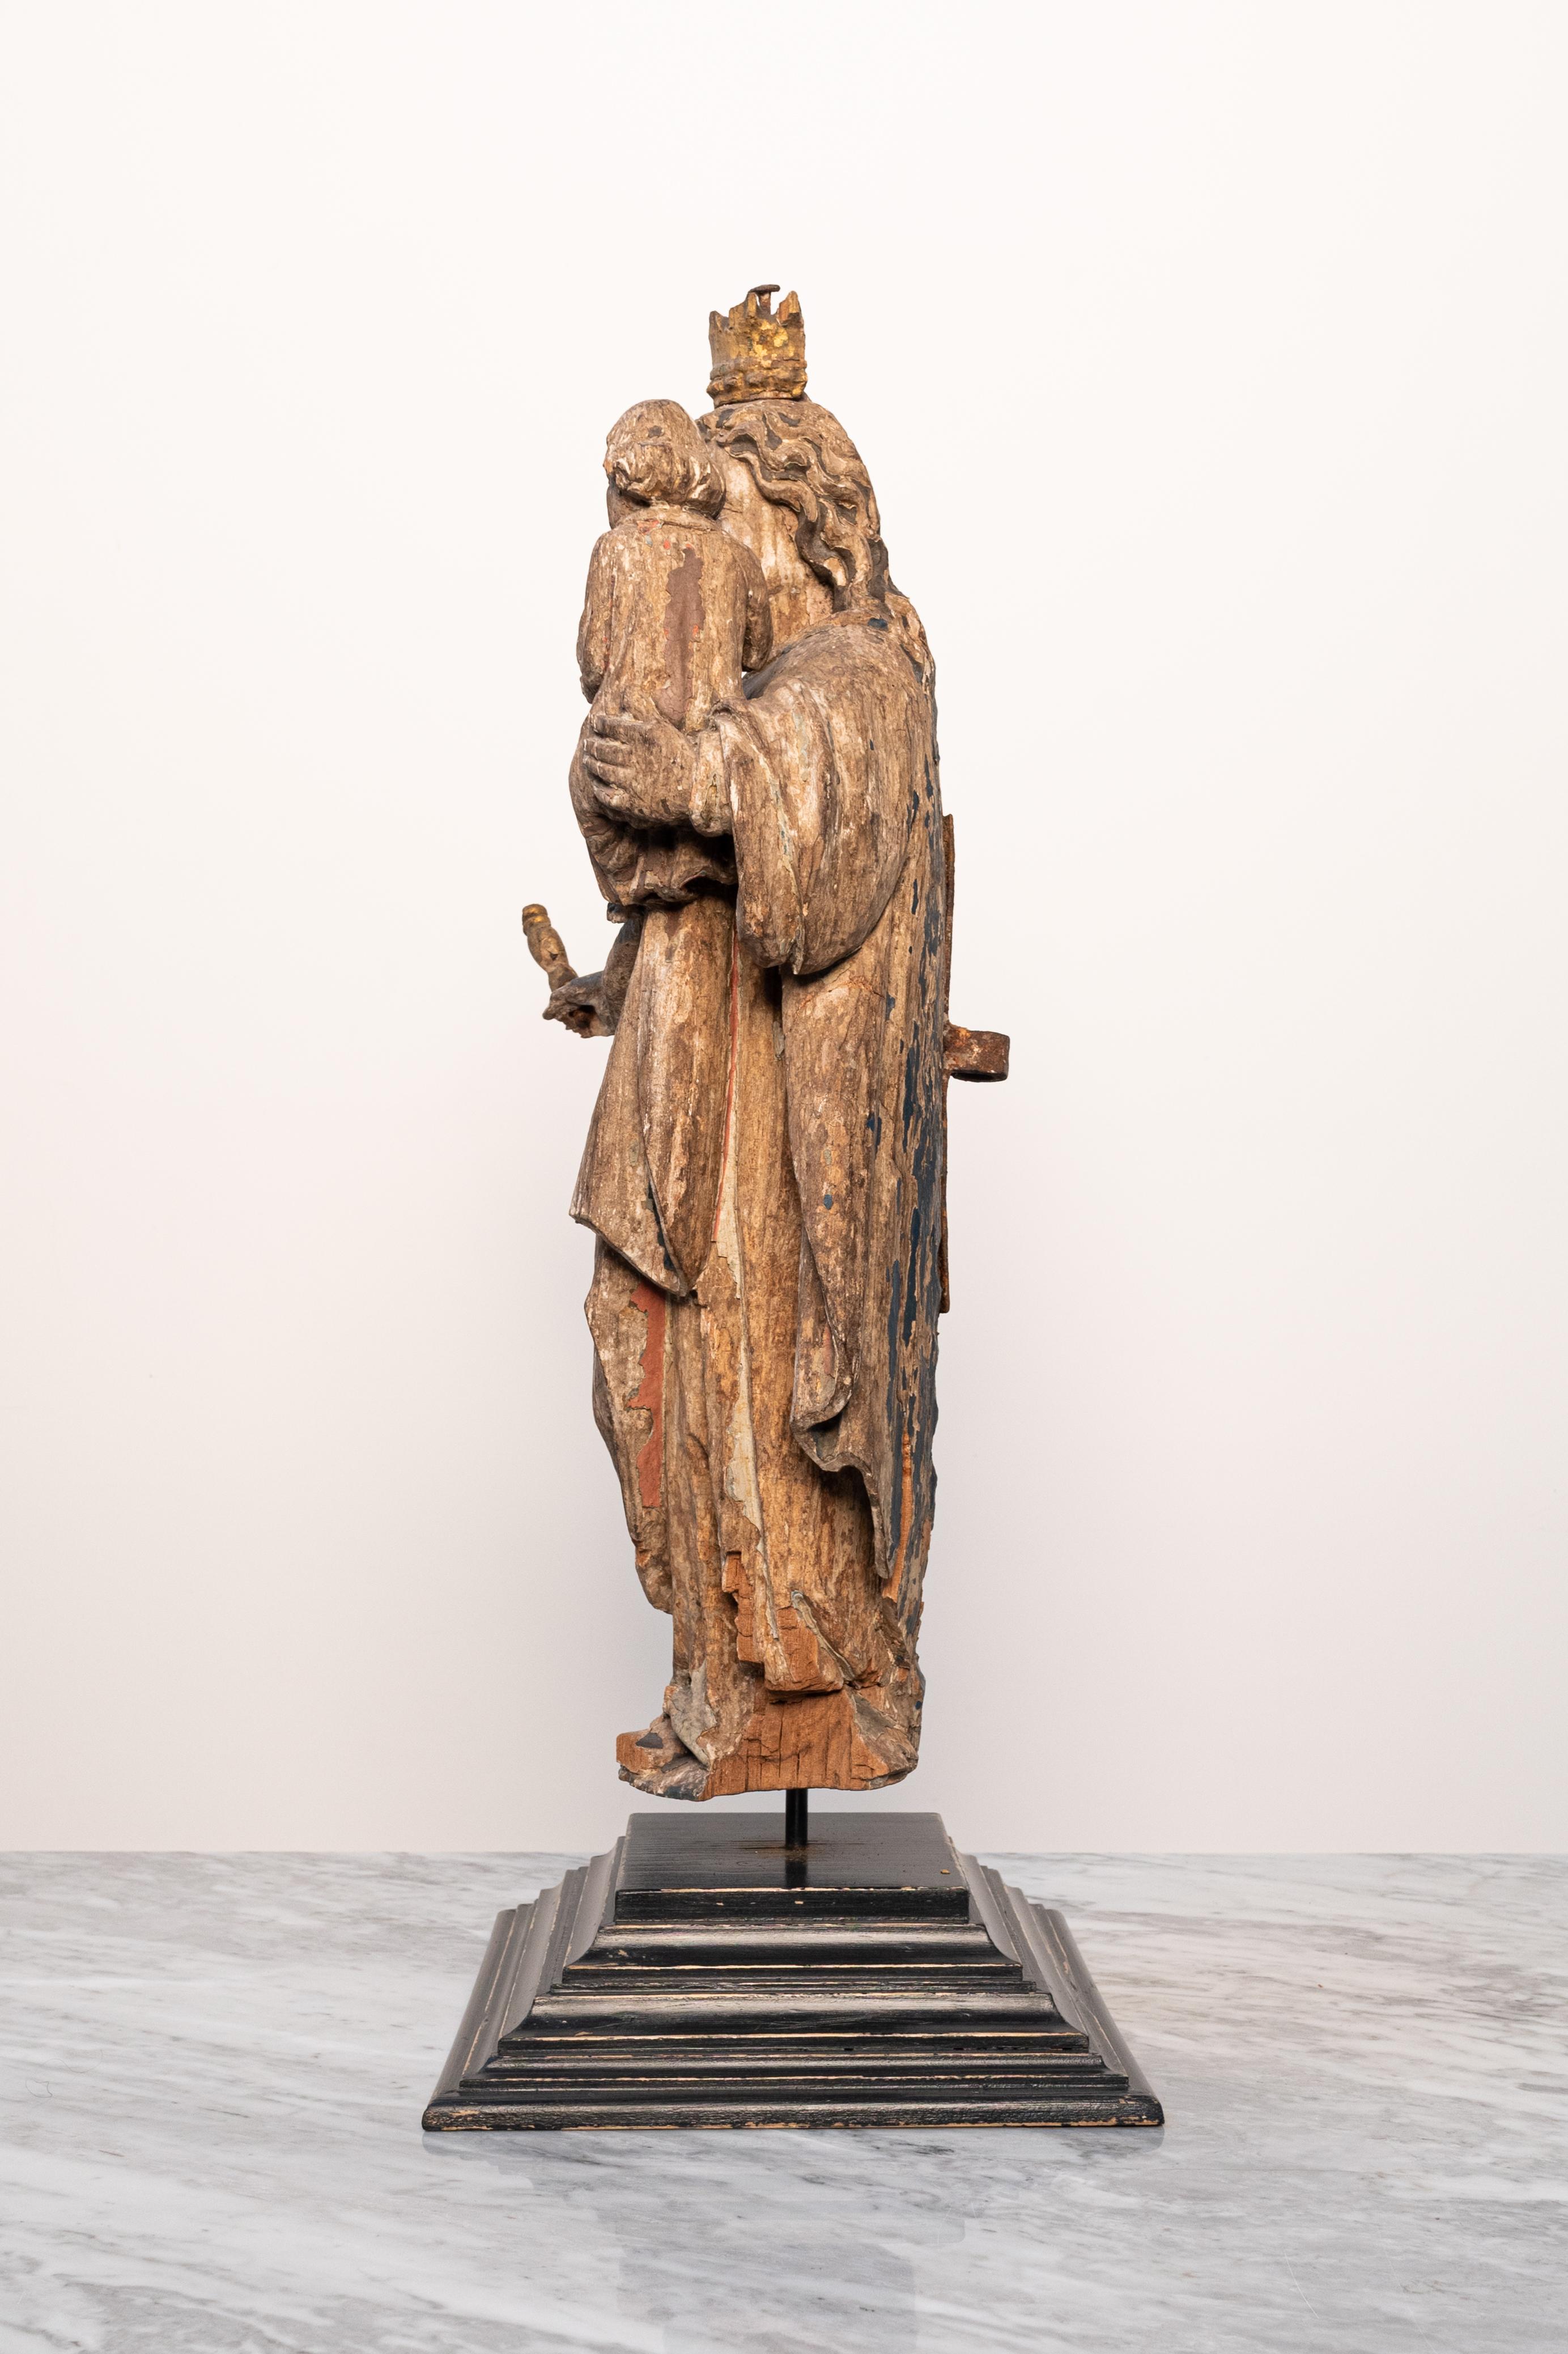 This 16th century hand-carved wooden Virgin Mary polychrome statue comes from a church in Sint-Niklaas, Belgium (Europe), and was bought directly from the church sacristan. 

It is made from walnut wood and her coat still shows some beautiful gold